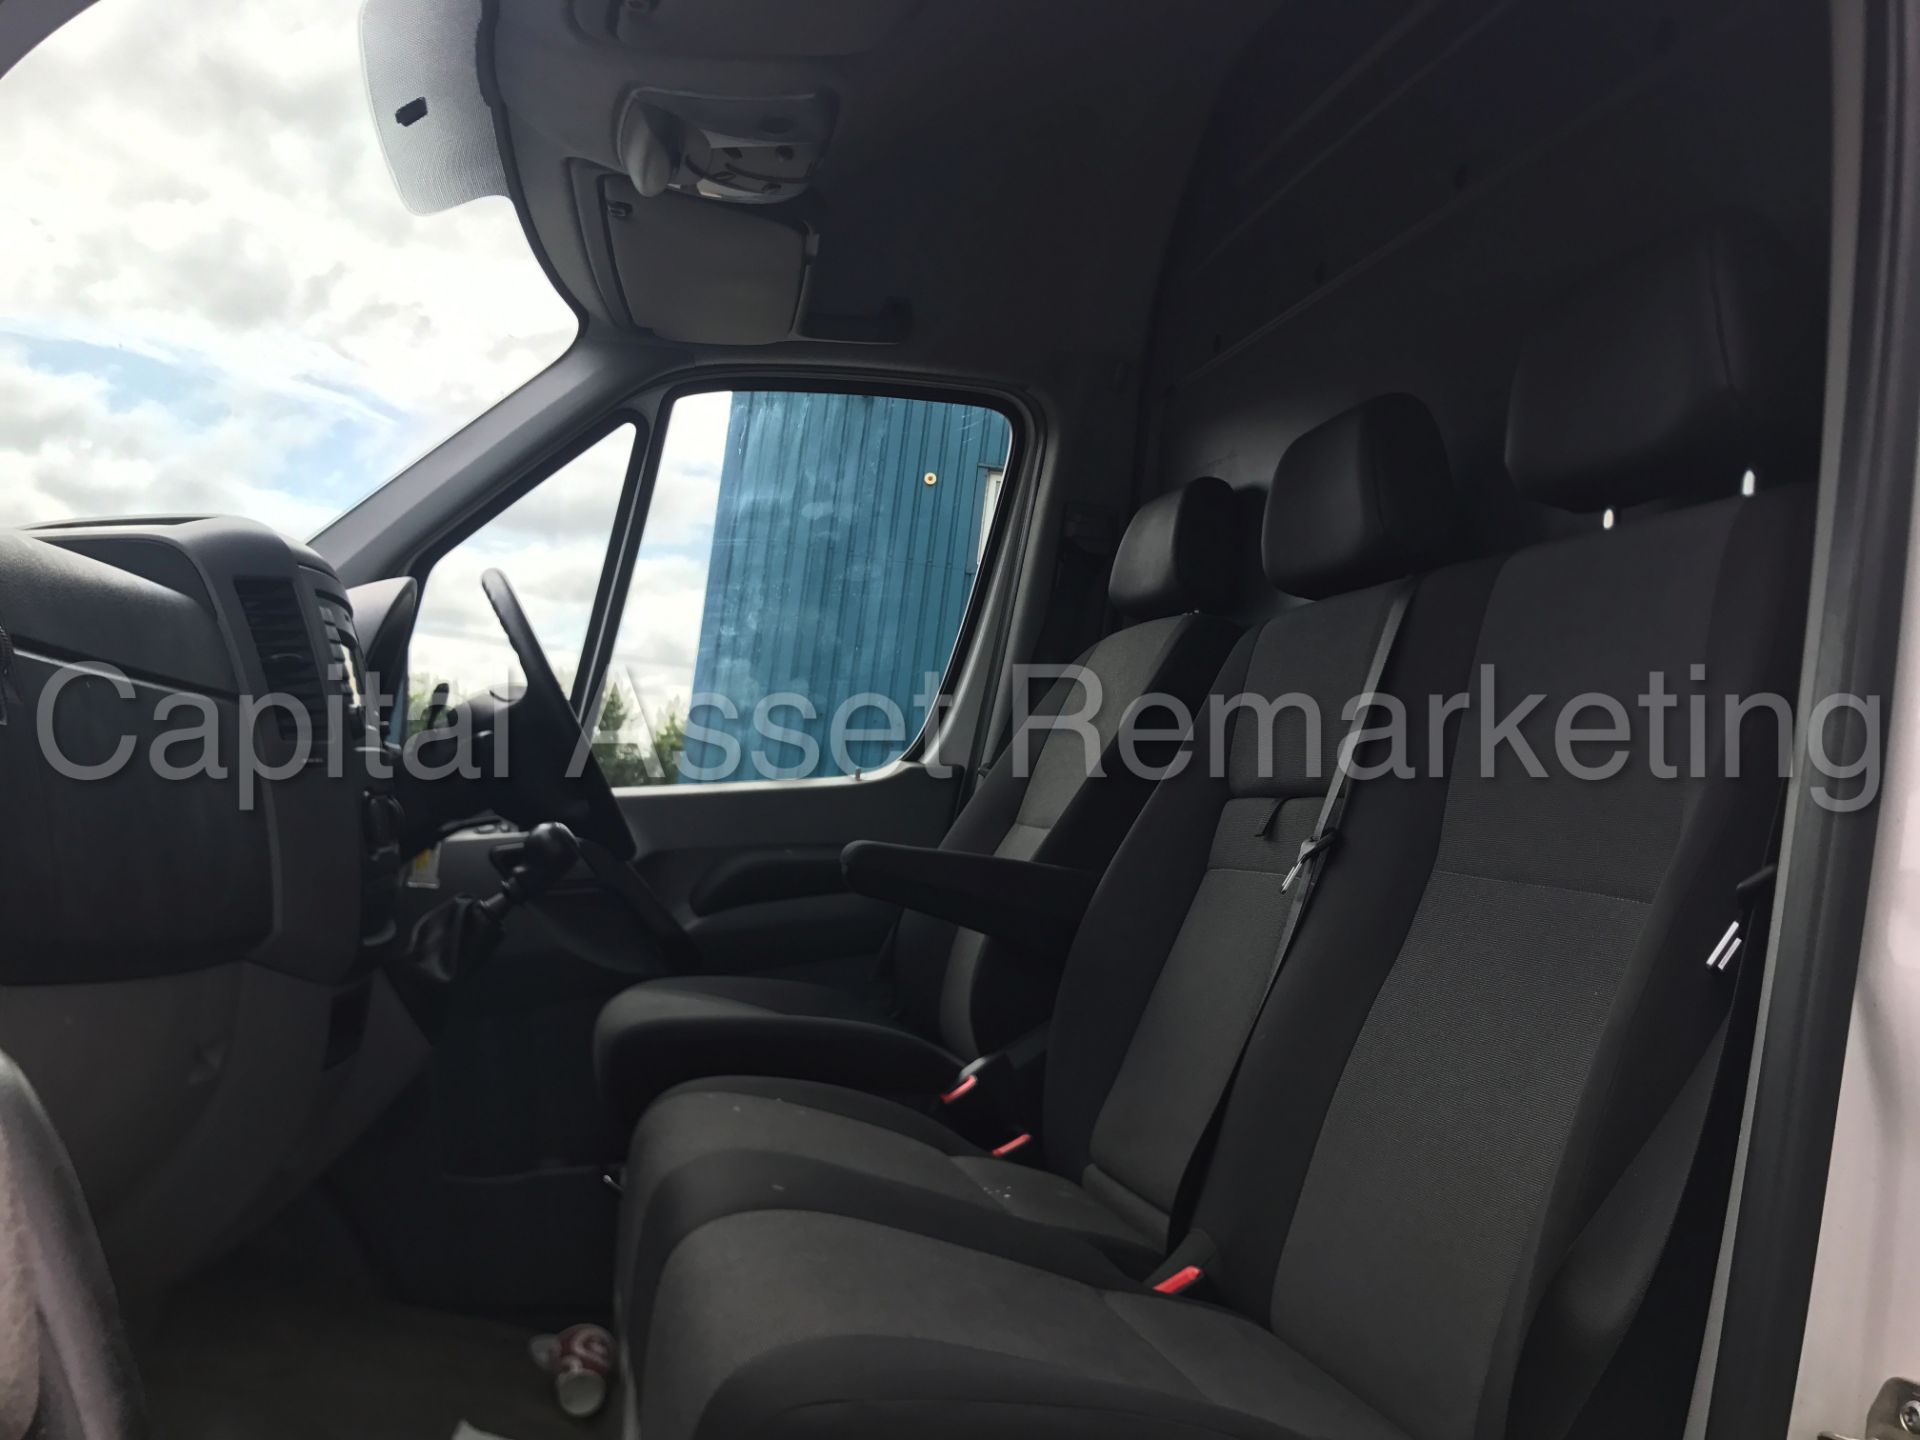 VOLKSWAGEN CRAFTER CR35 'LWB HI-ROOF' (2015) '2.0 TDI - 136 BHP - 6 SPEED' (1 COMPANY OWNER) - Image 13 of 24